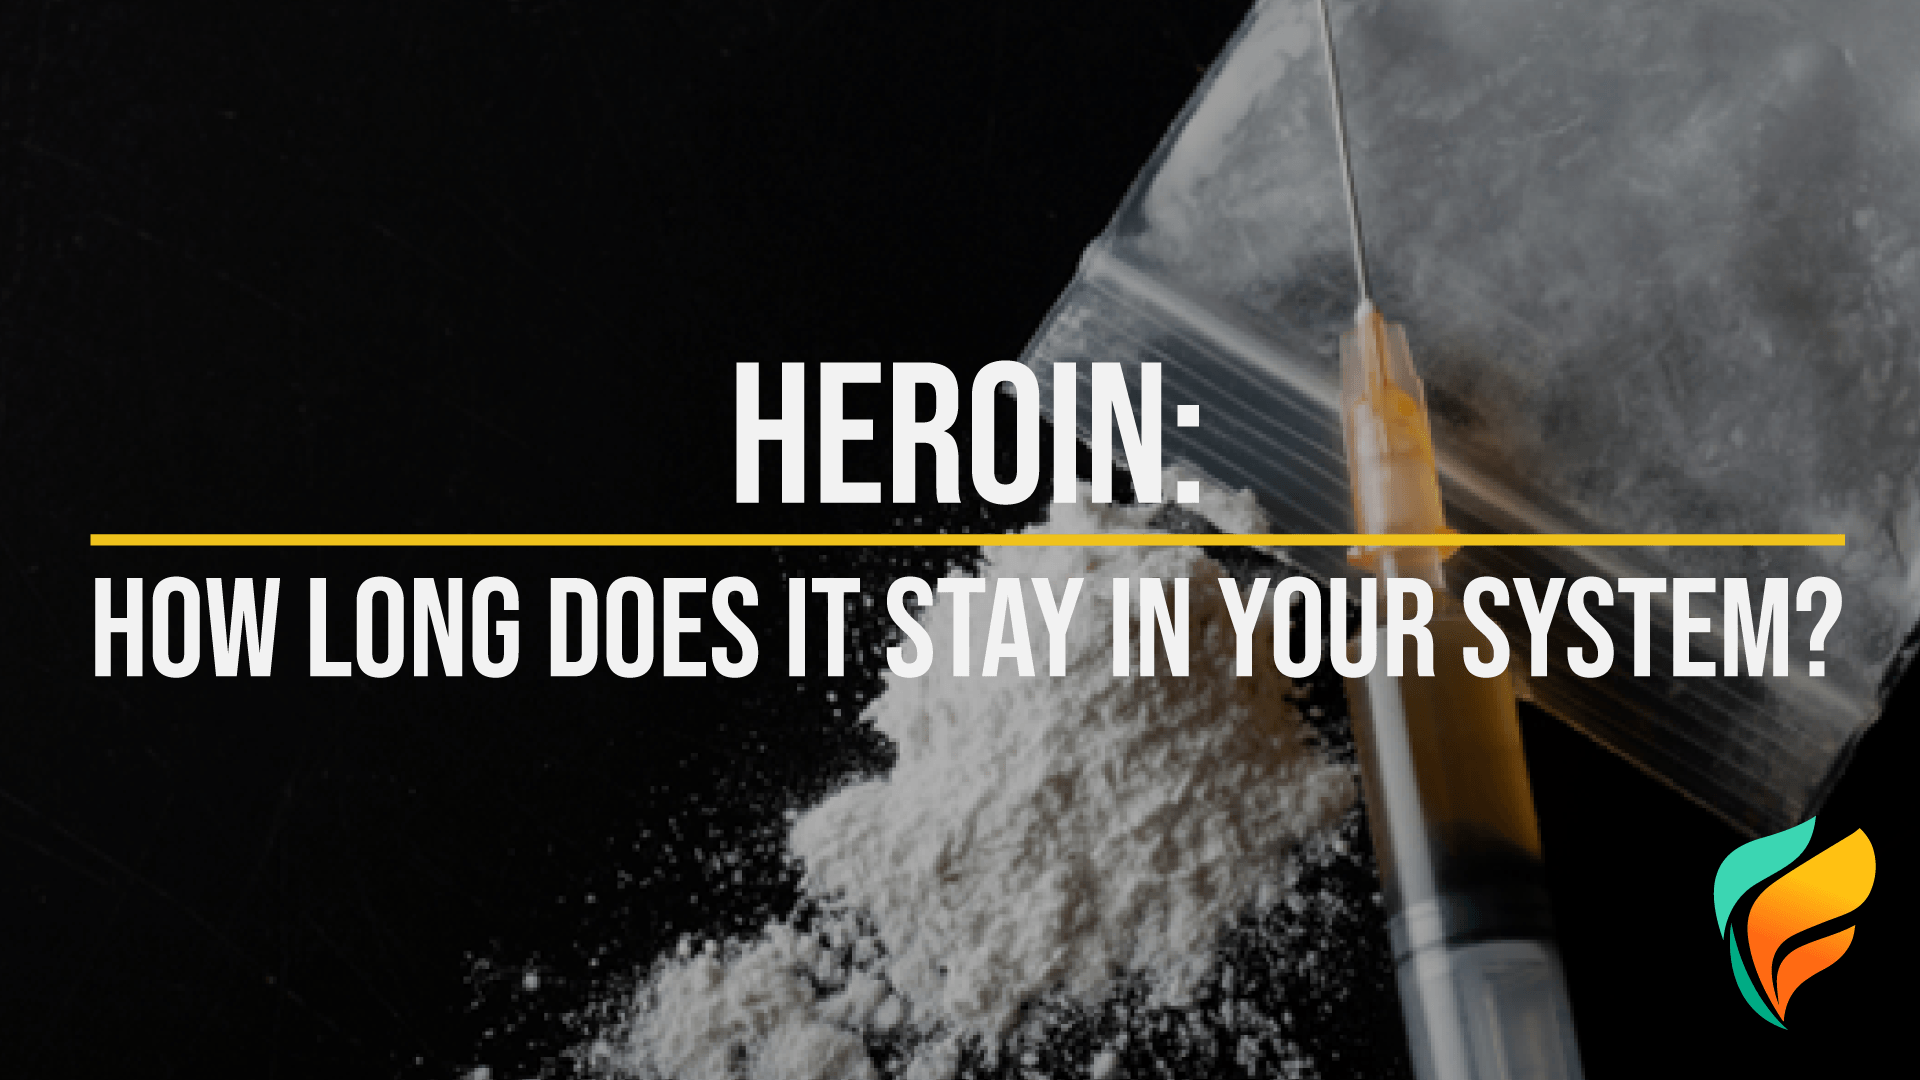 Heroin: How Long Does Heroin Stay in Your System? We Answer This & More